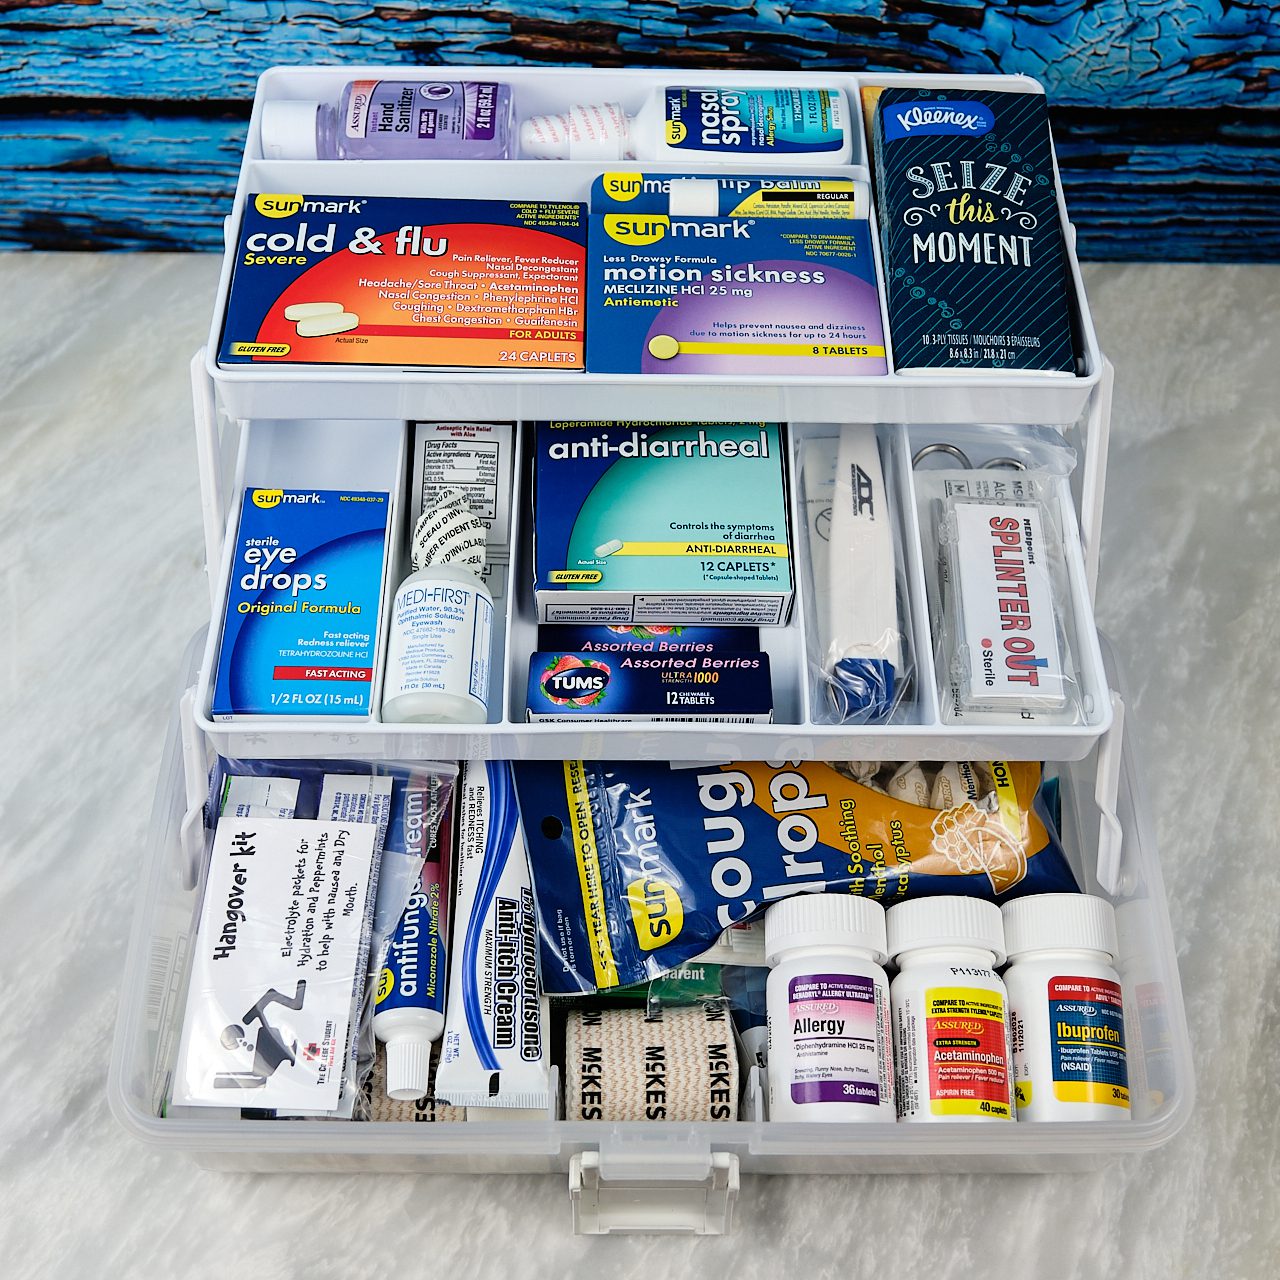 College Student First Aid Kit Divine Lifestyle Health